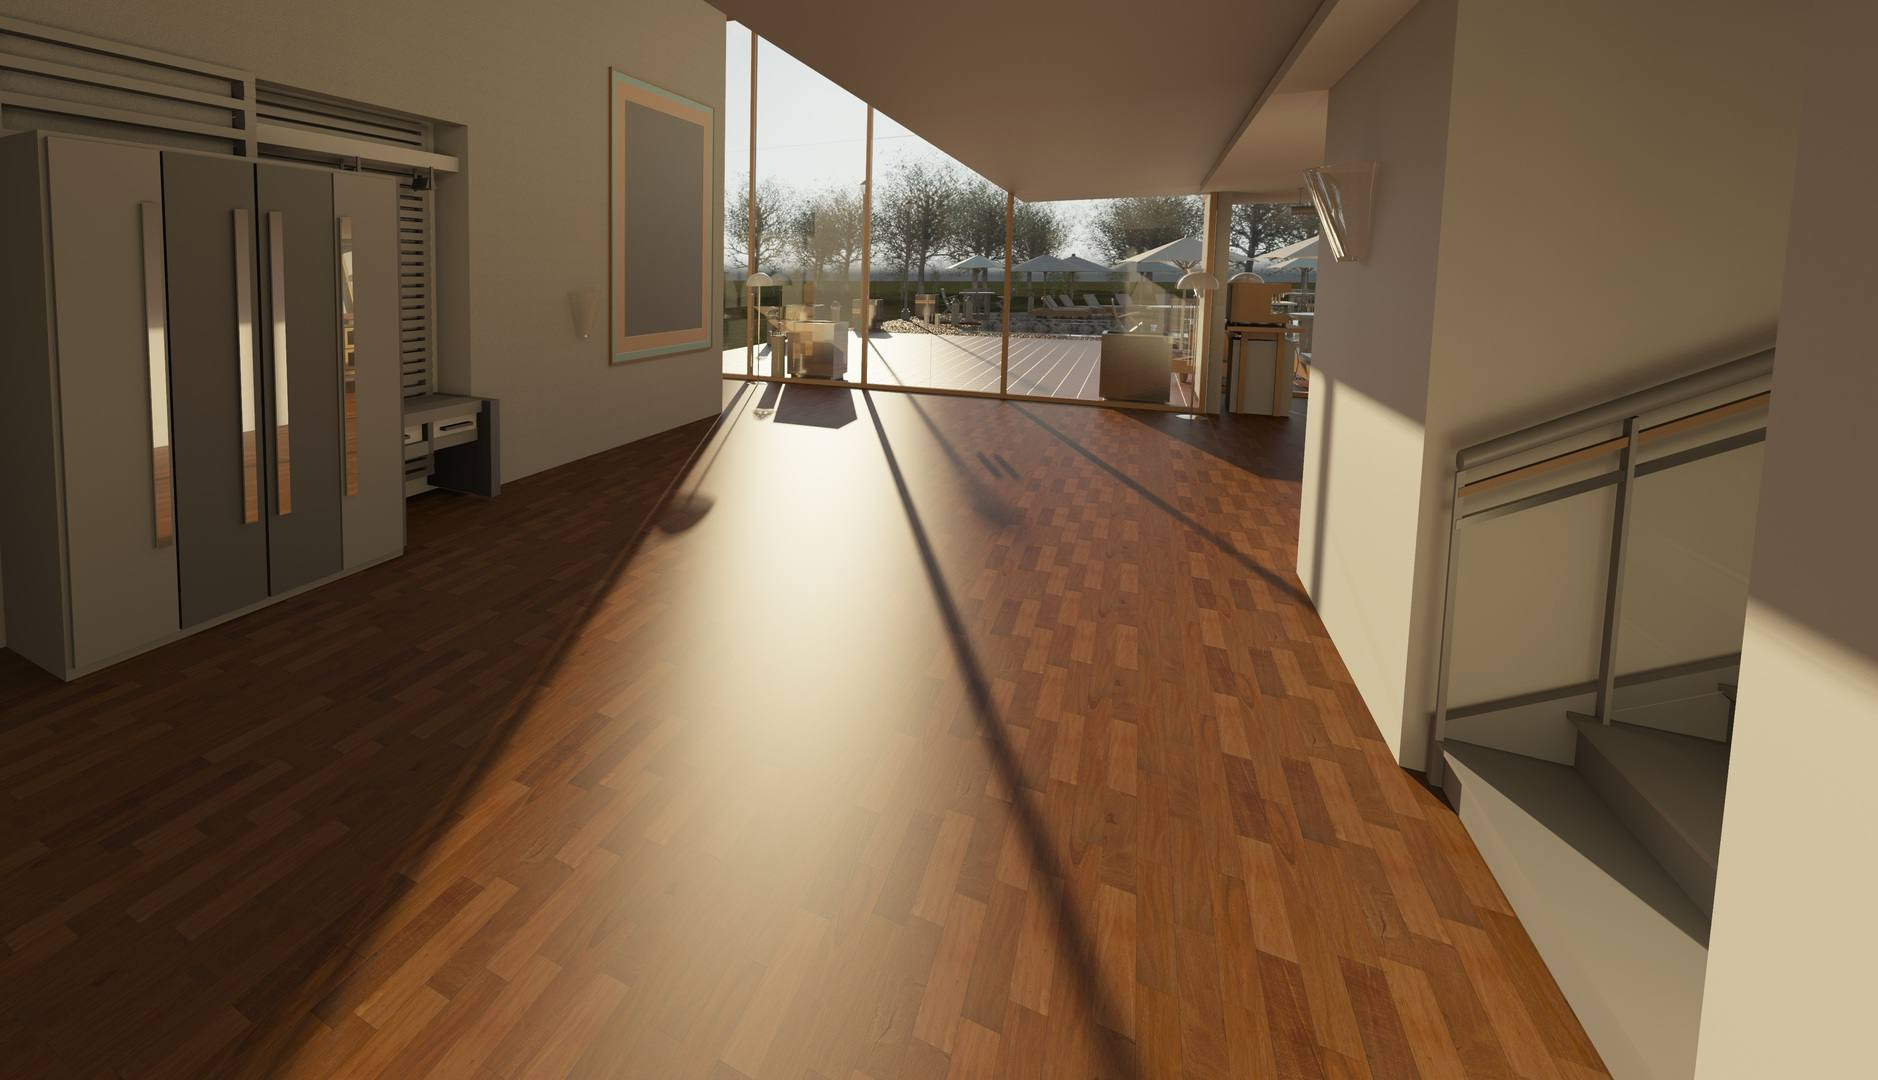 27 Famous Laminate Wood Flooring Vs Hardwood Cost 2024 free download laminate wood flooring vs hardwood cost of common flooring types currently used in renovation and building in architecture wood house floor interior window 917178 pxhere com 5ba27a2cc9e77c00